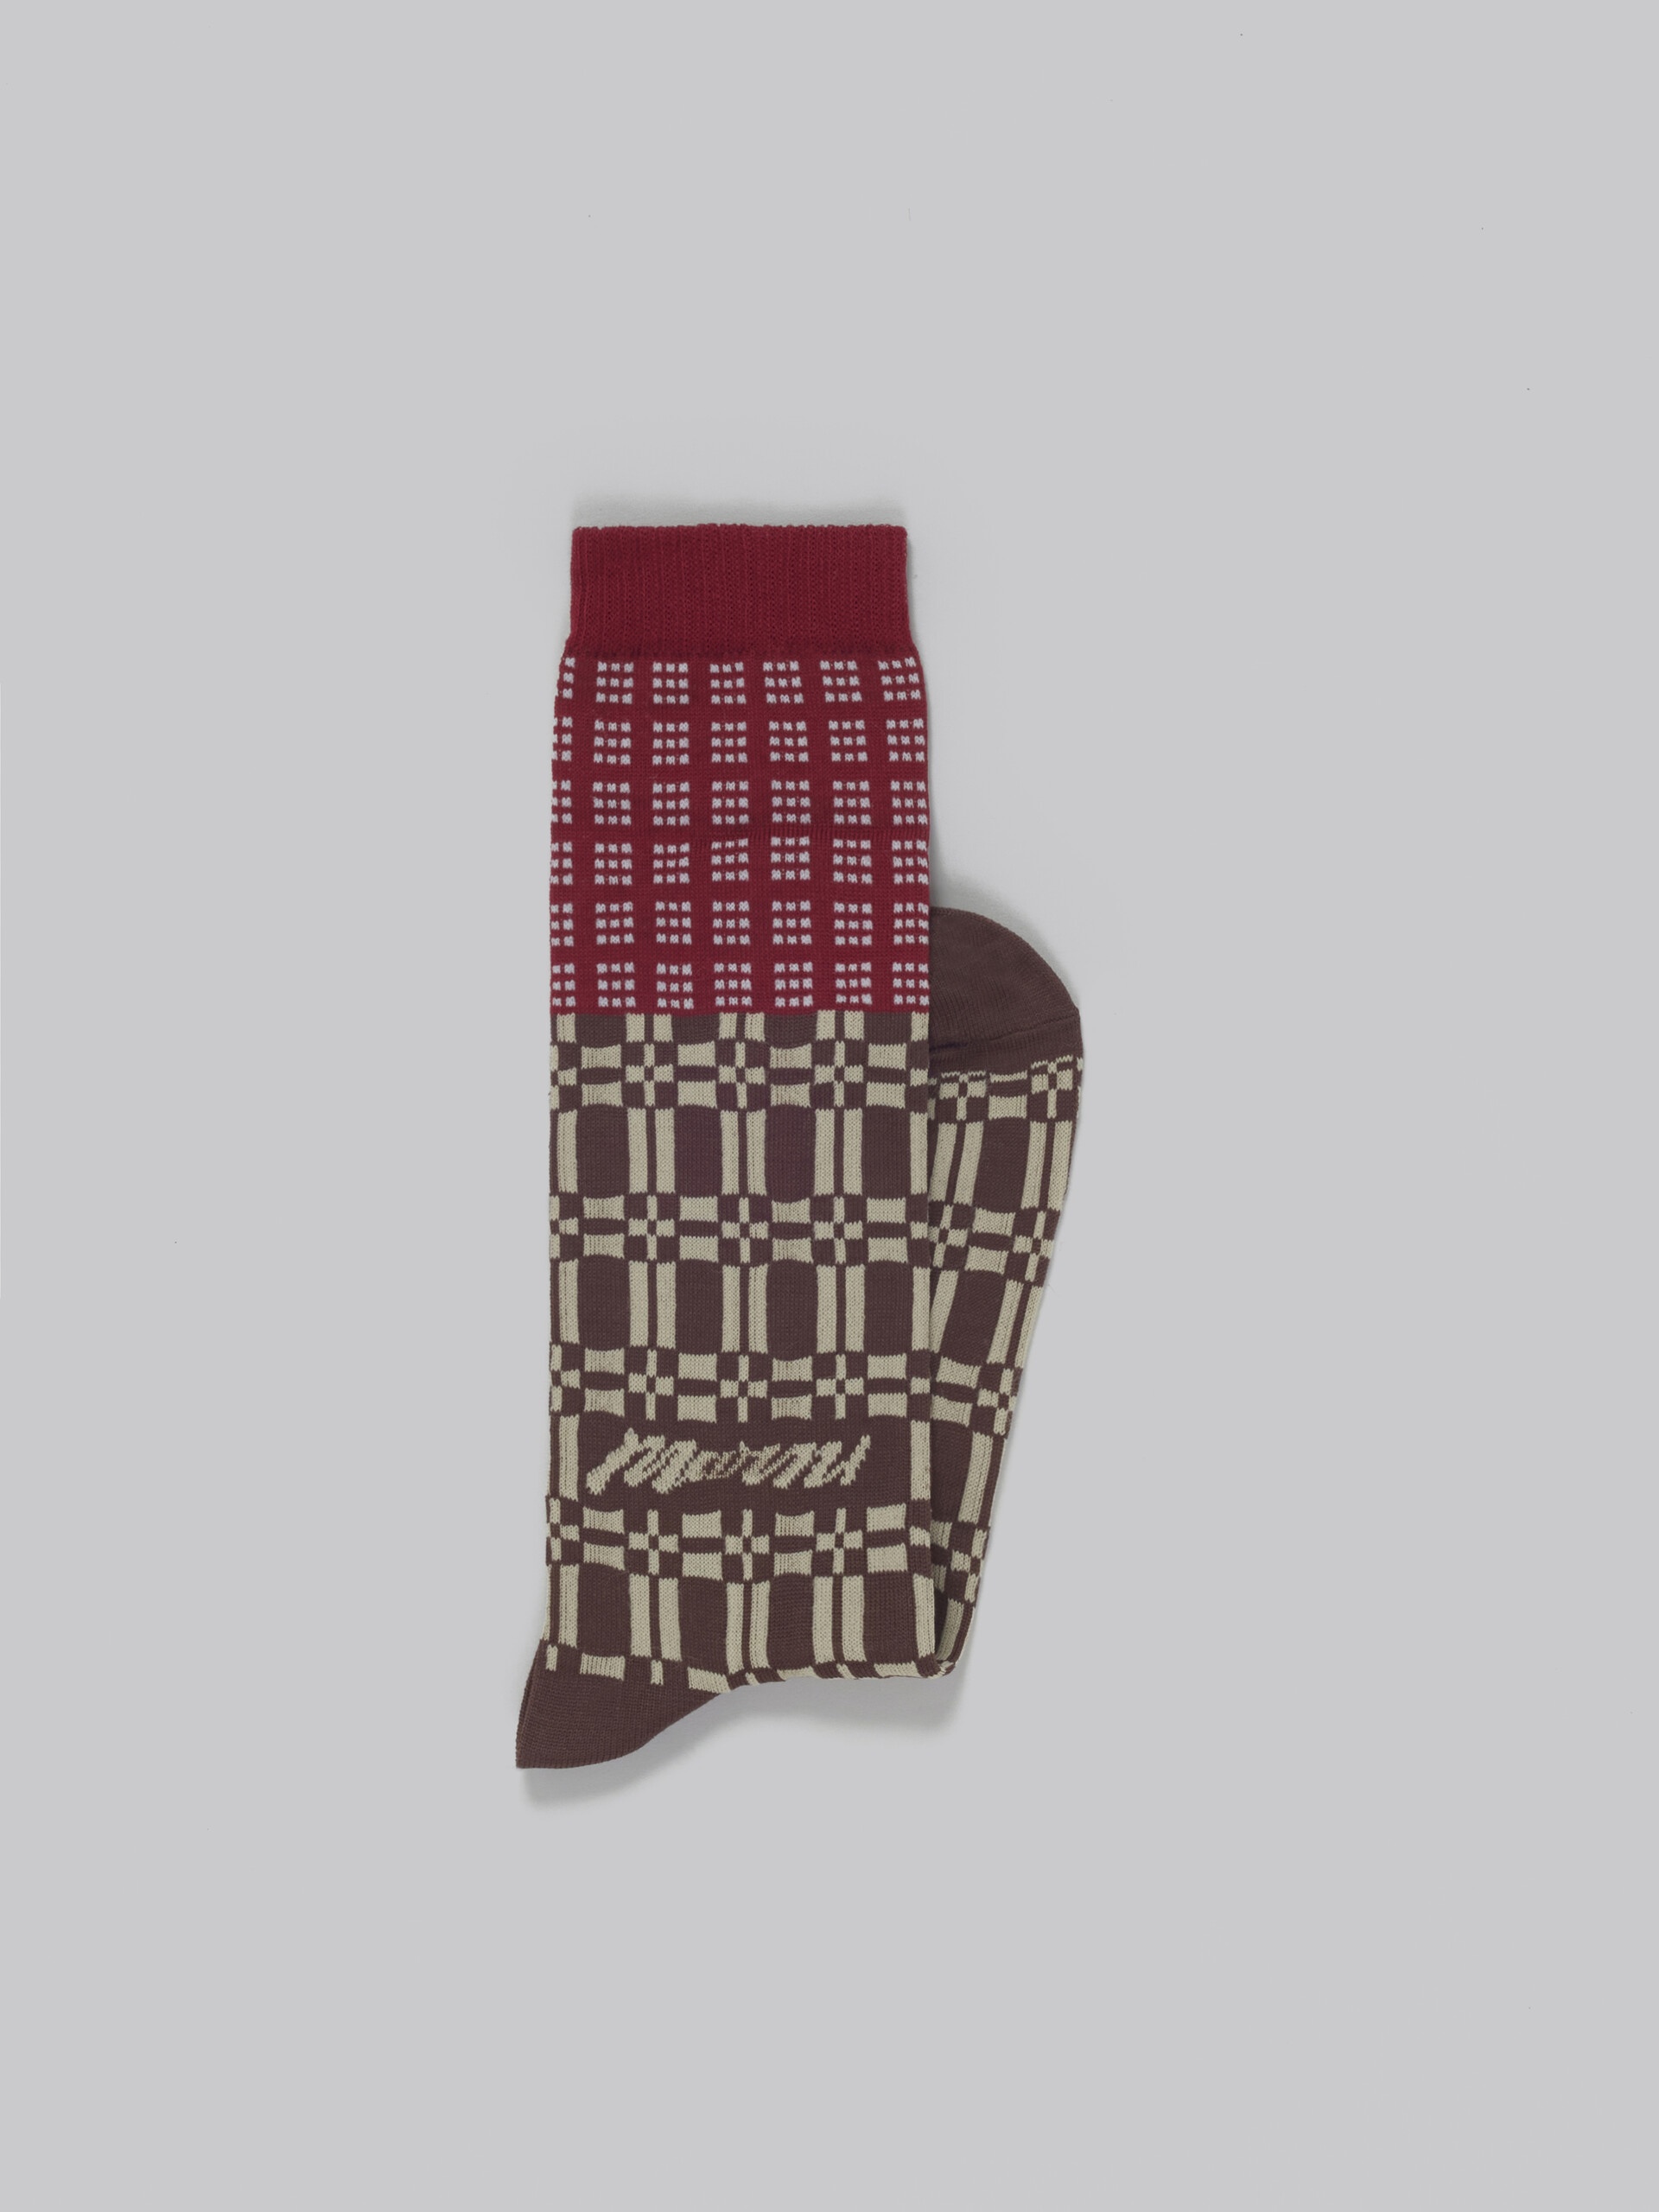 RED SOCKS WITH GEOMETRIC PATTERNS - 2